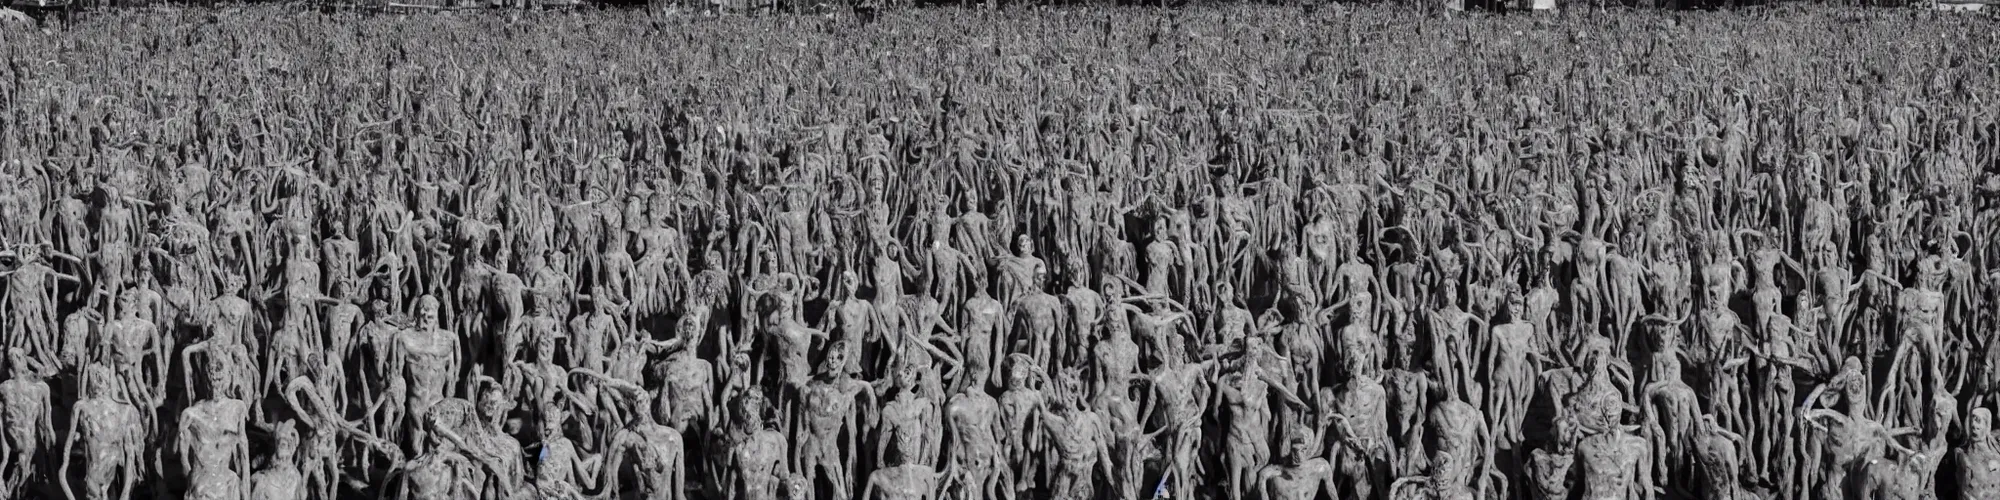 Prompt: hundreds of humans. A sea of humans. interconnected flesh. Crowdcrush. Many humans intertwined and woven together. Bodies and forms amesh. Extremely unsettling artwork. Screaming humans. The overall vibe is doom and despair. Sculpture by Alberto Giacometti.